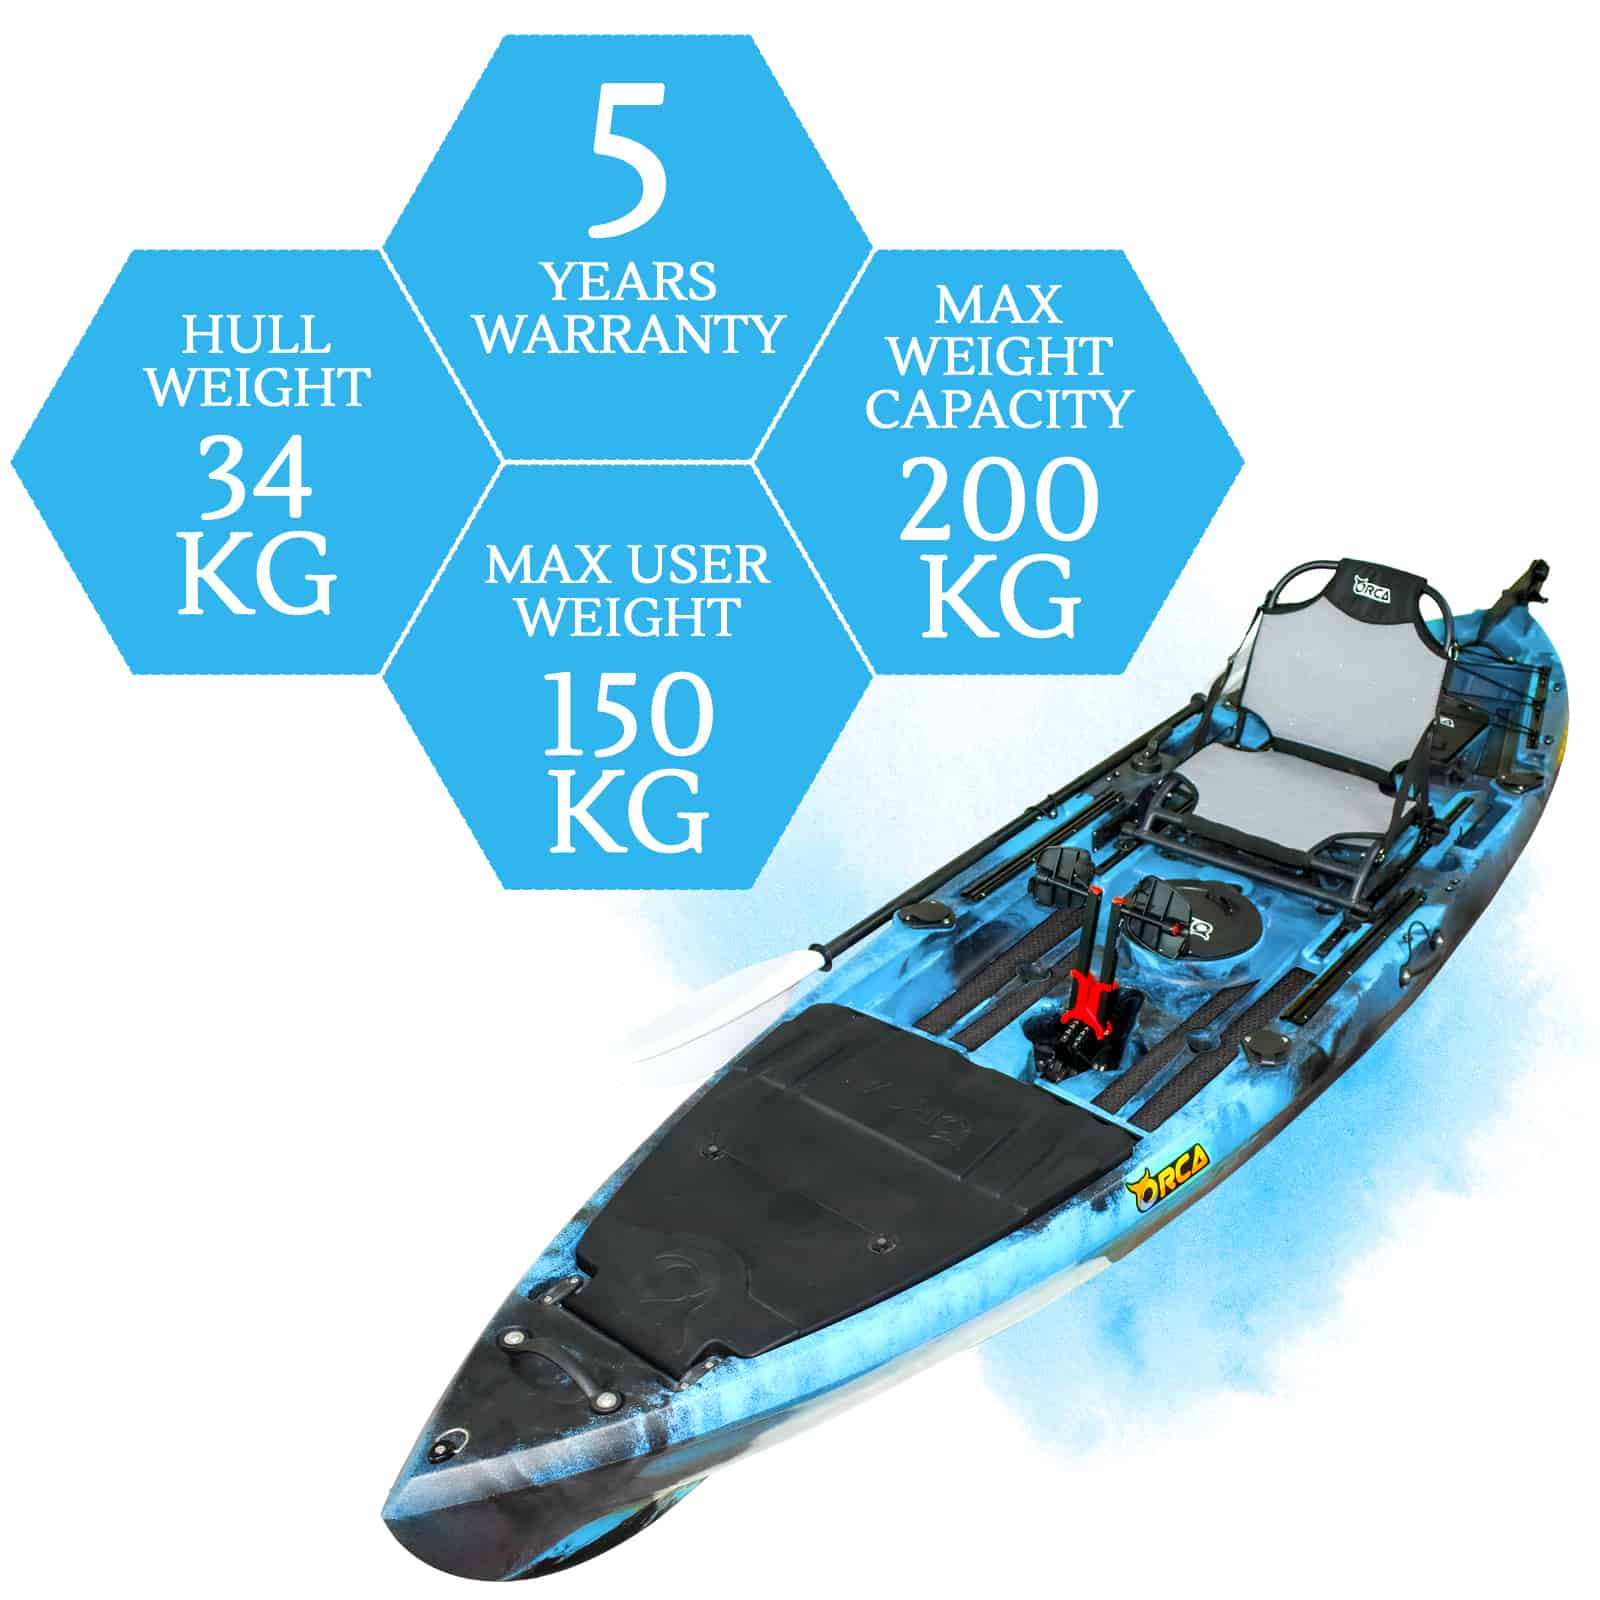 OR-KRONOS-BAHAMAS-MAX specifications